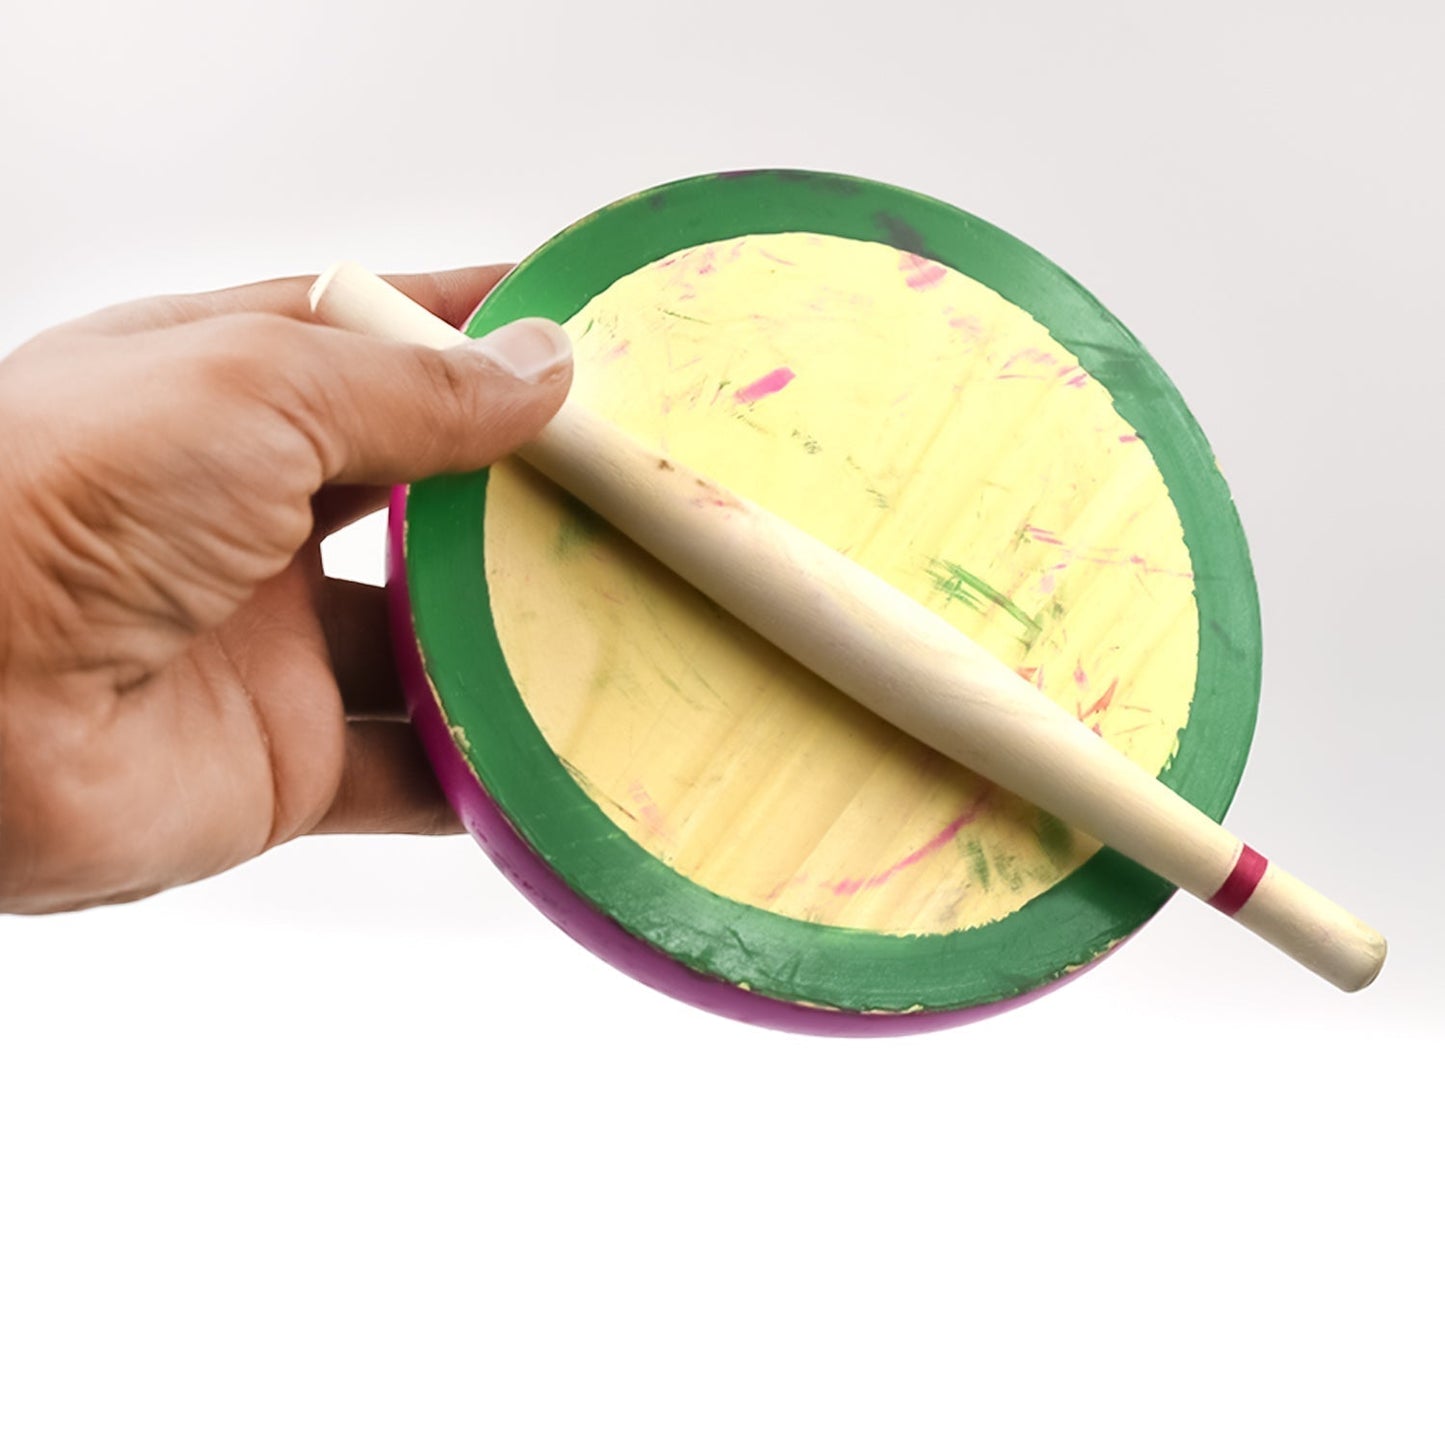 2695 Kids Chakla Belan Set used in all kinds of household places by kids and children’s for playing purposes etc.